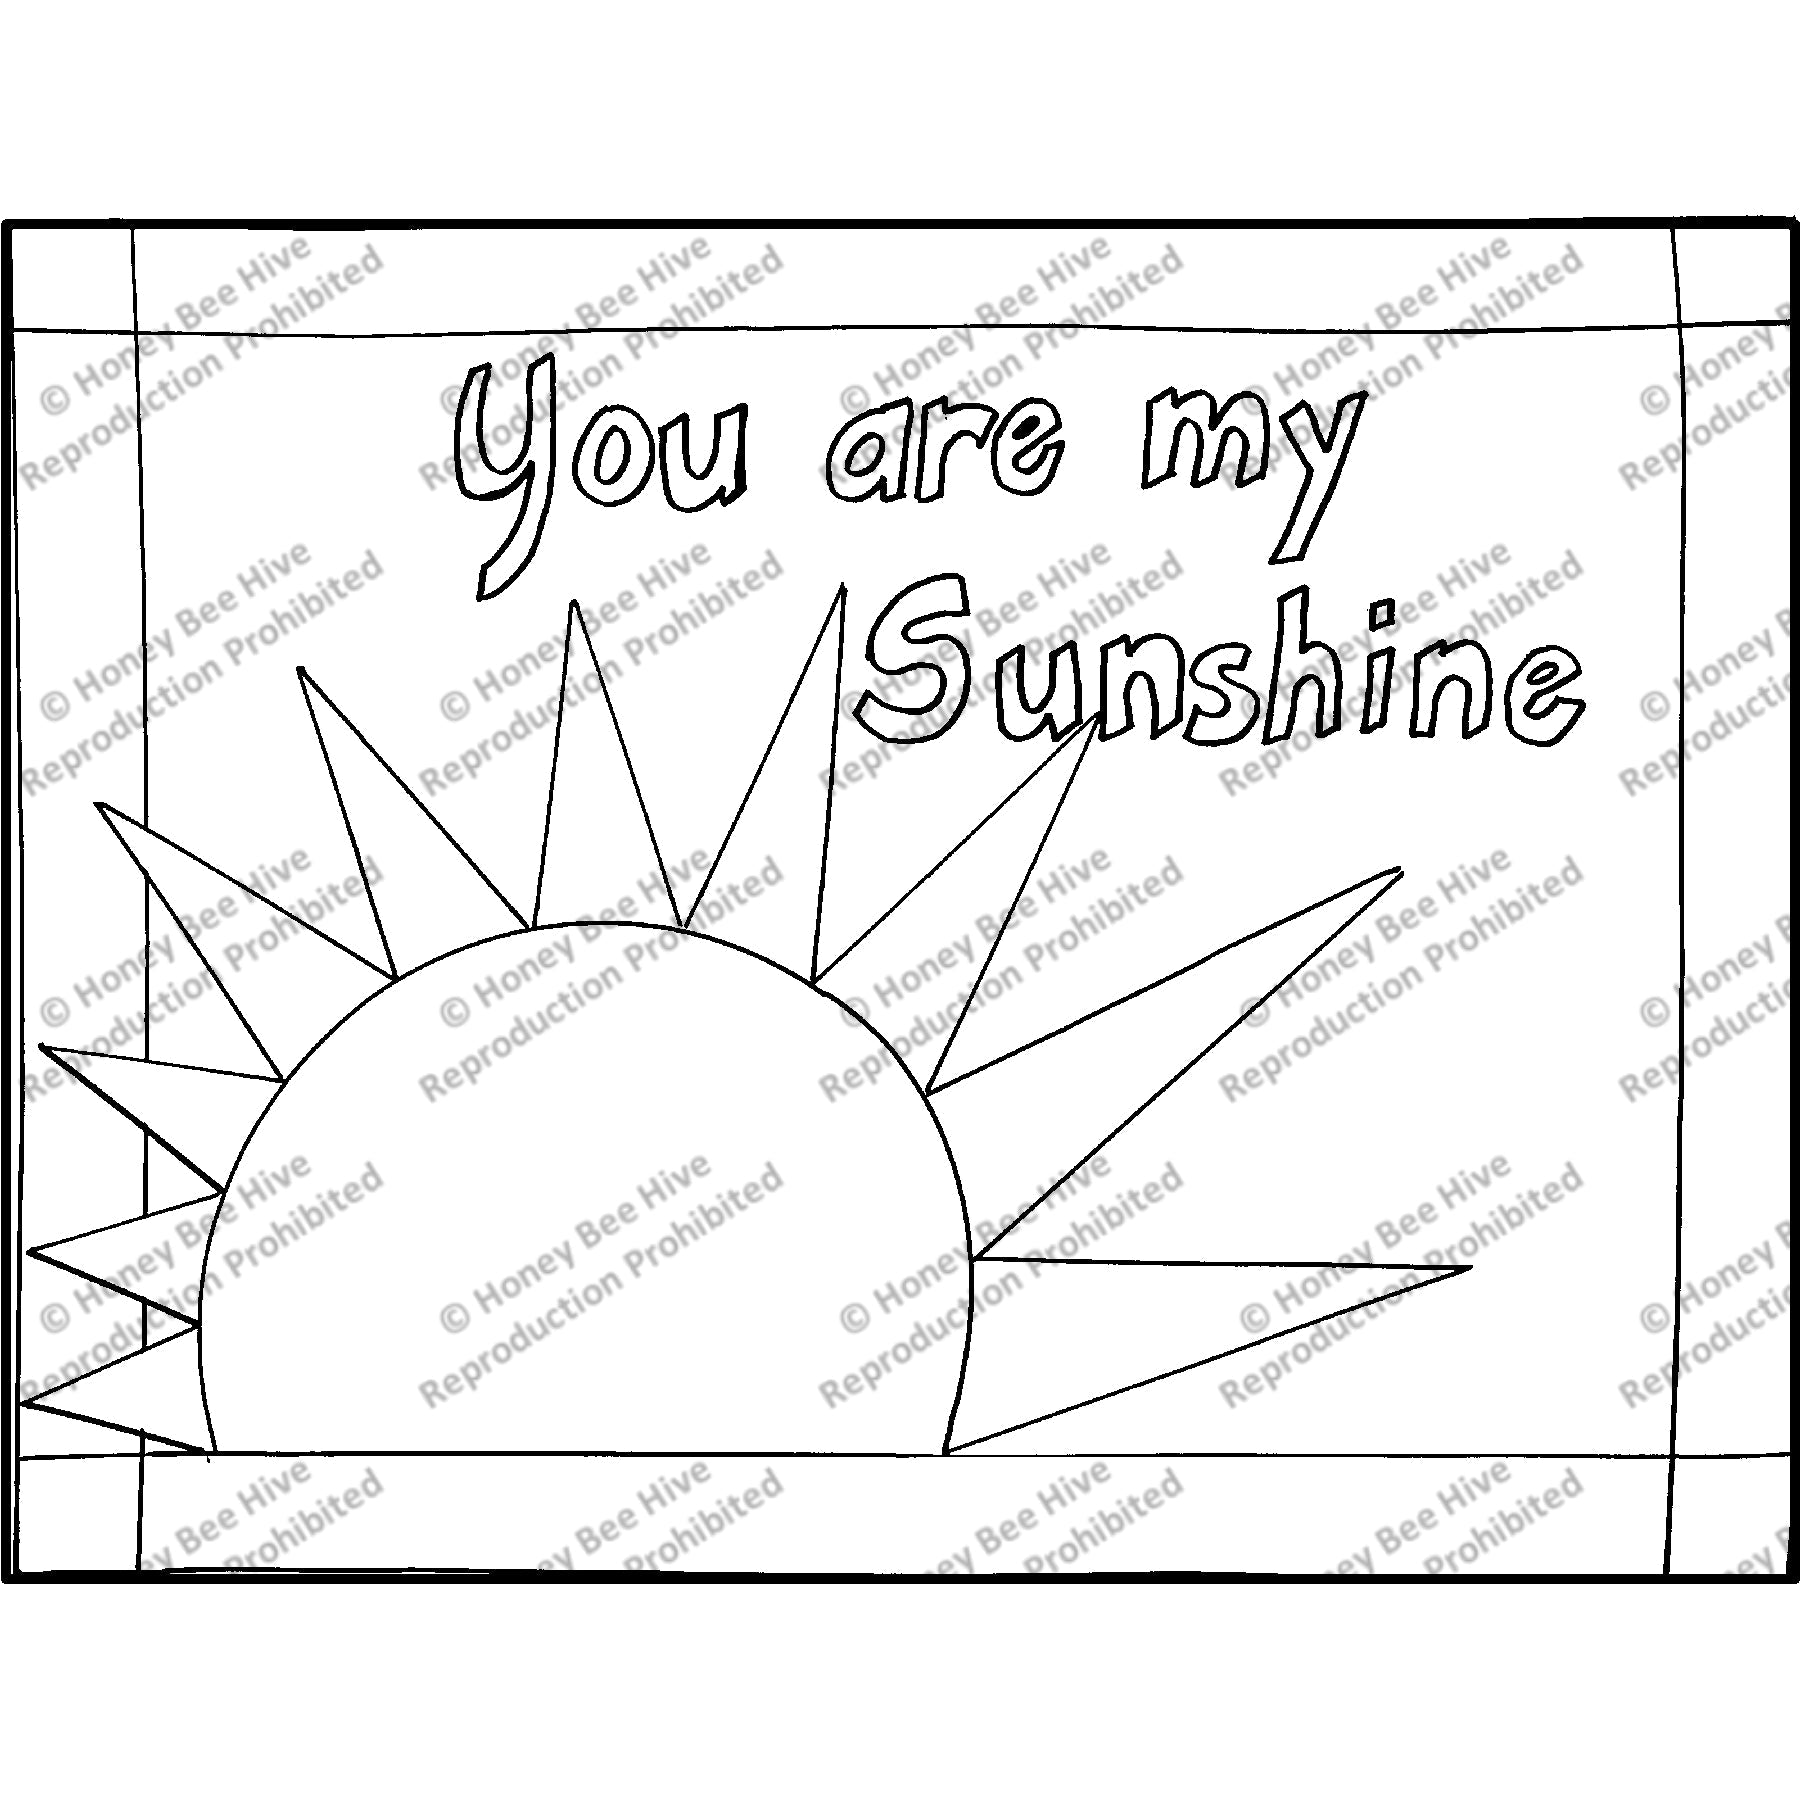 You are my Sunshine, rug hooking pattern